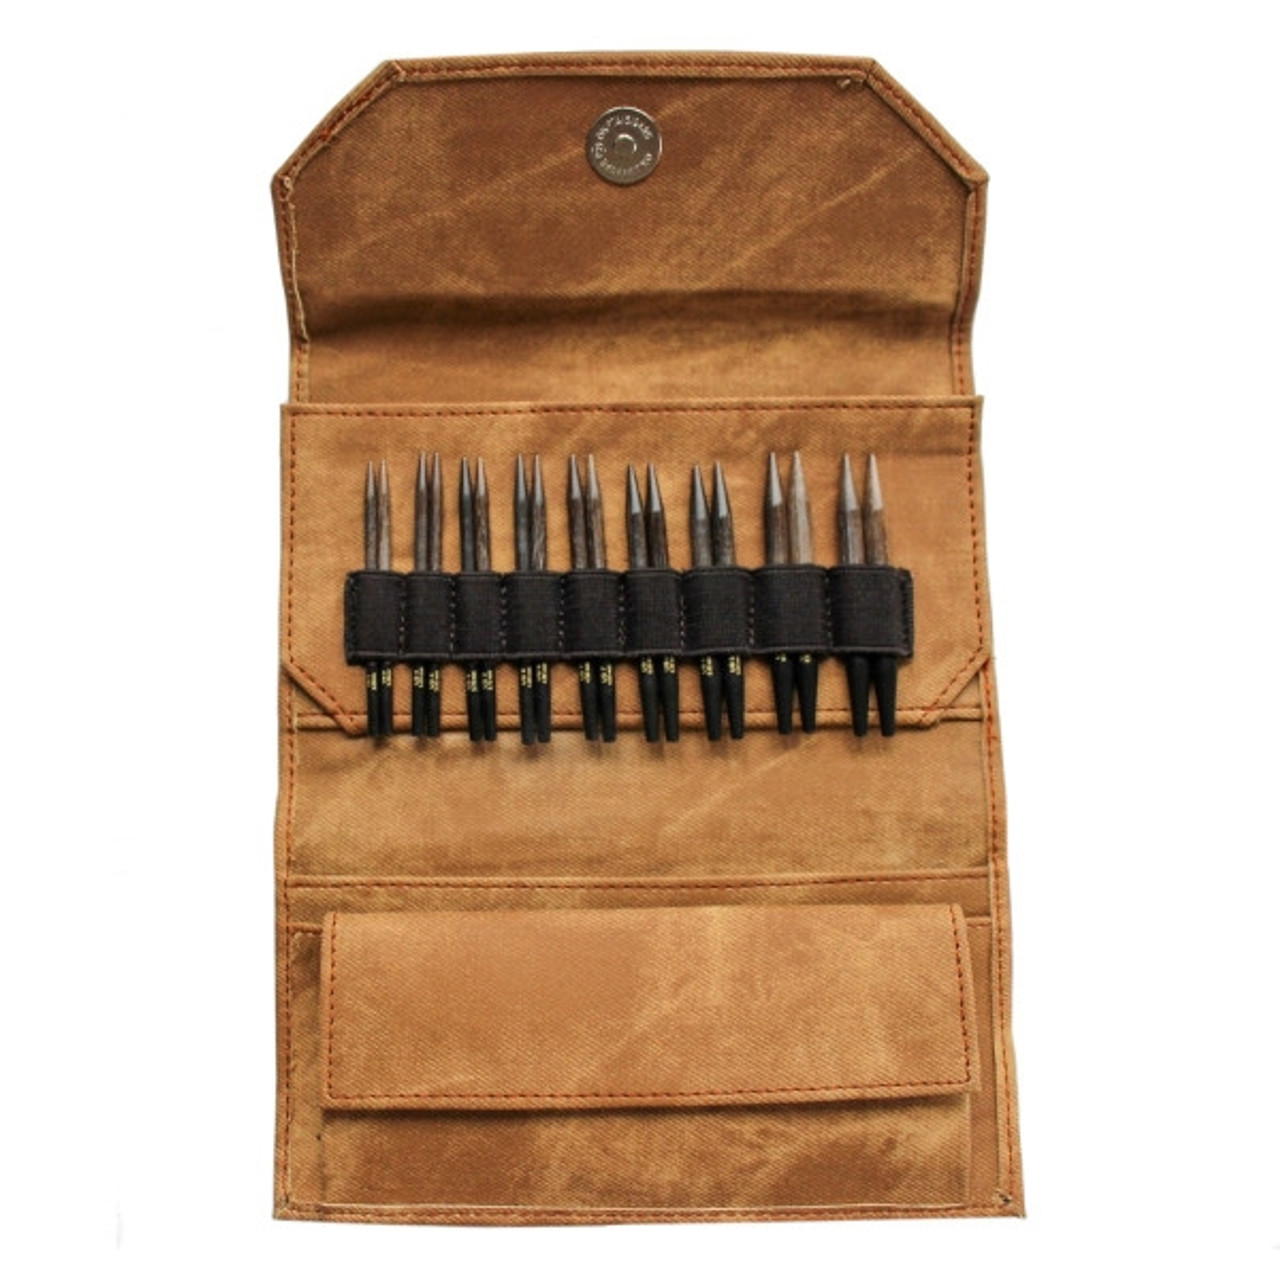 Lykke Umber Interchangeable Circular Needle Set 3.5 Inch - The Websters